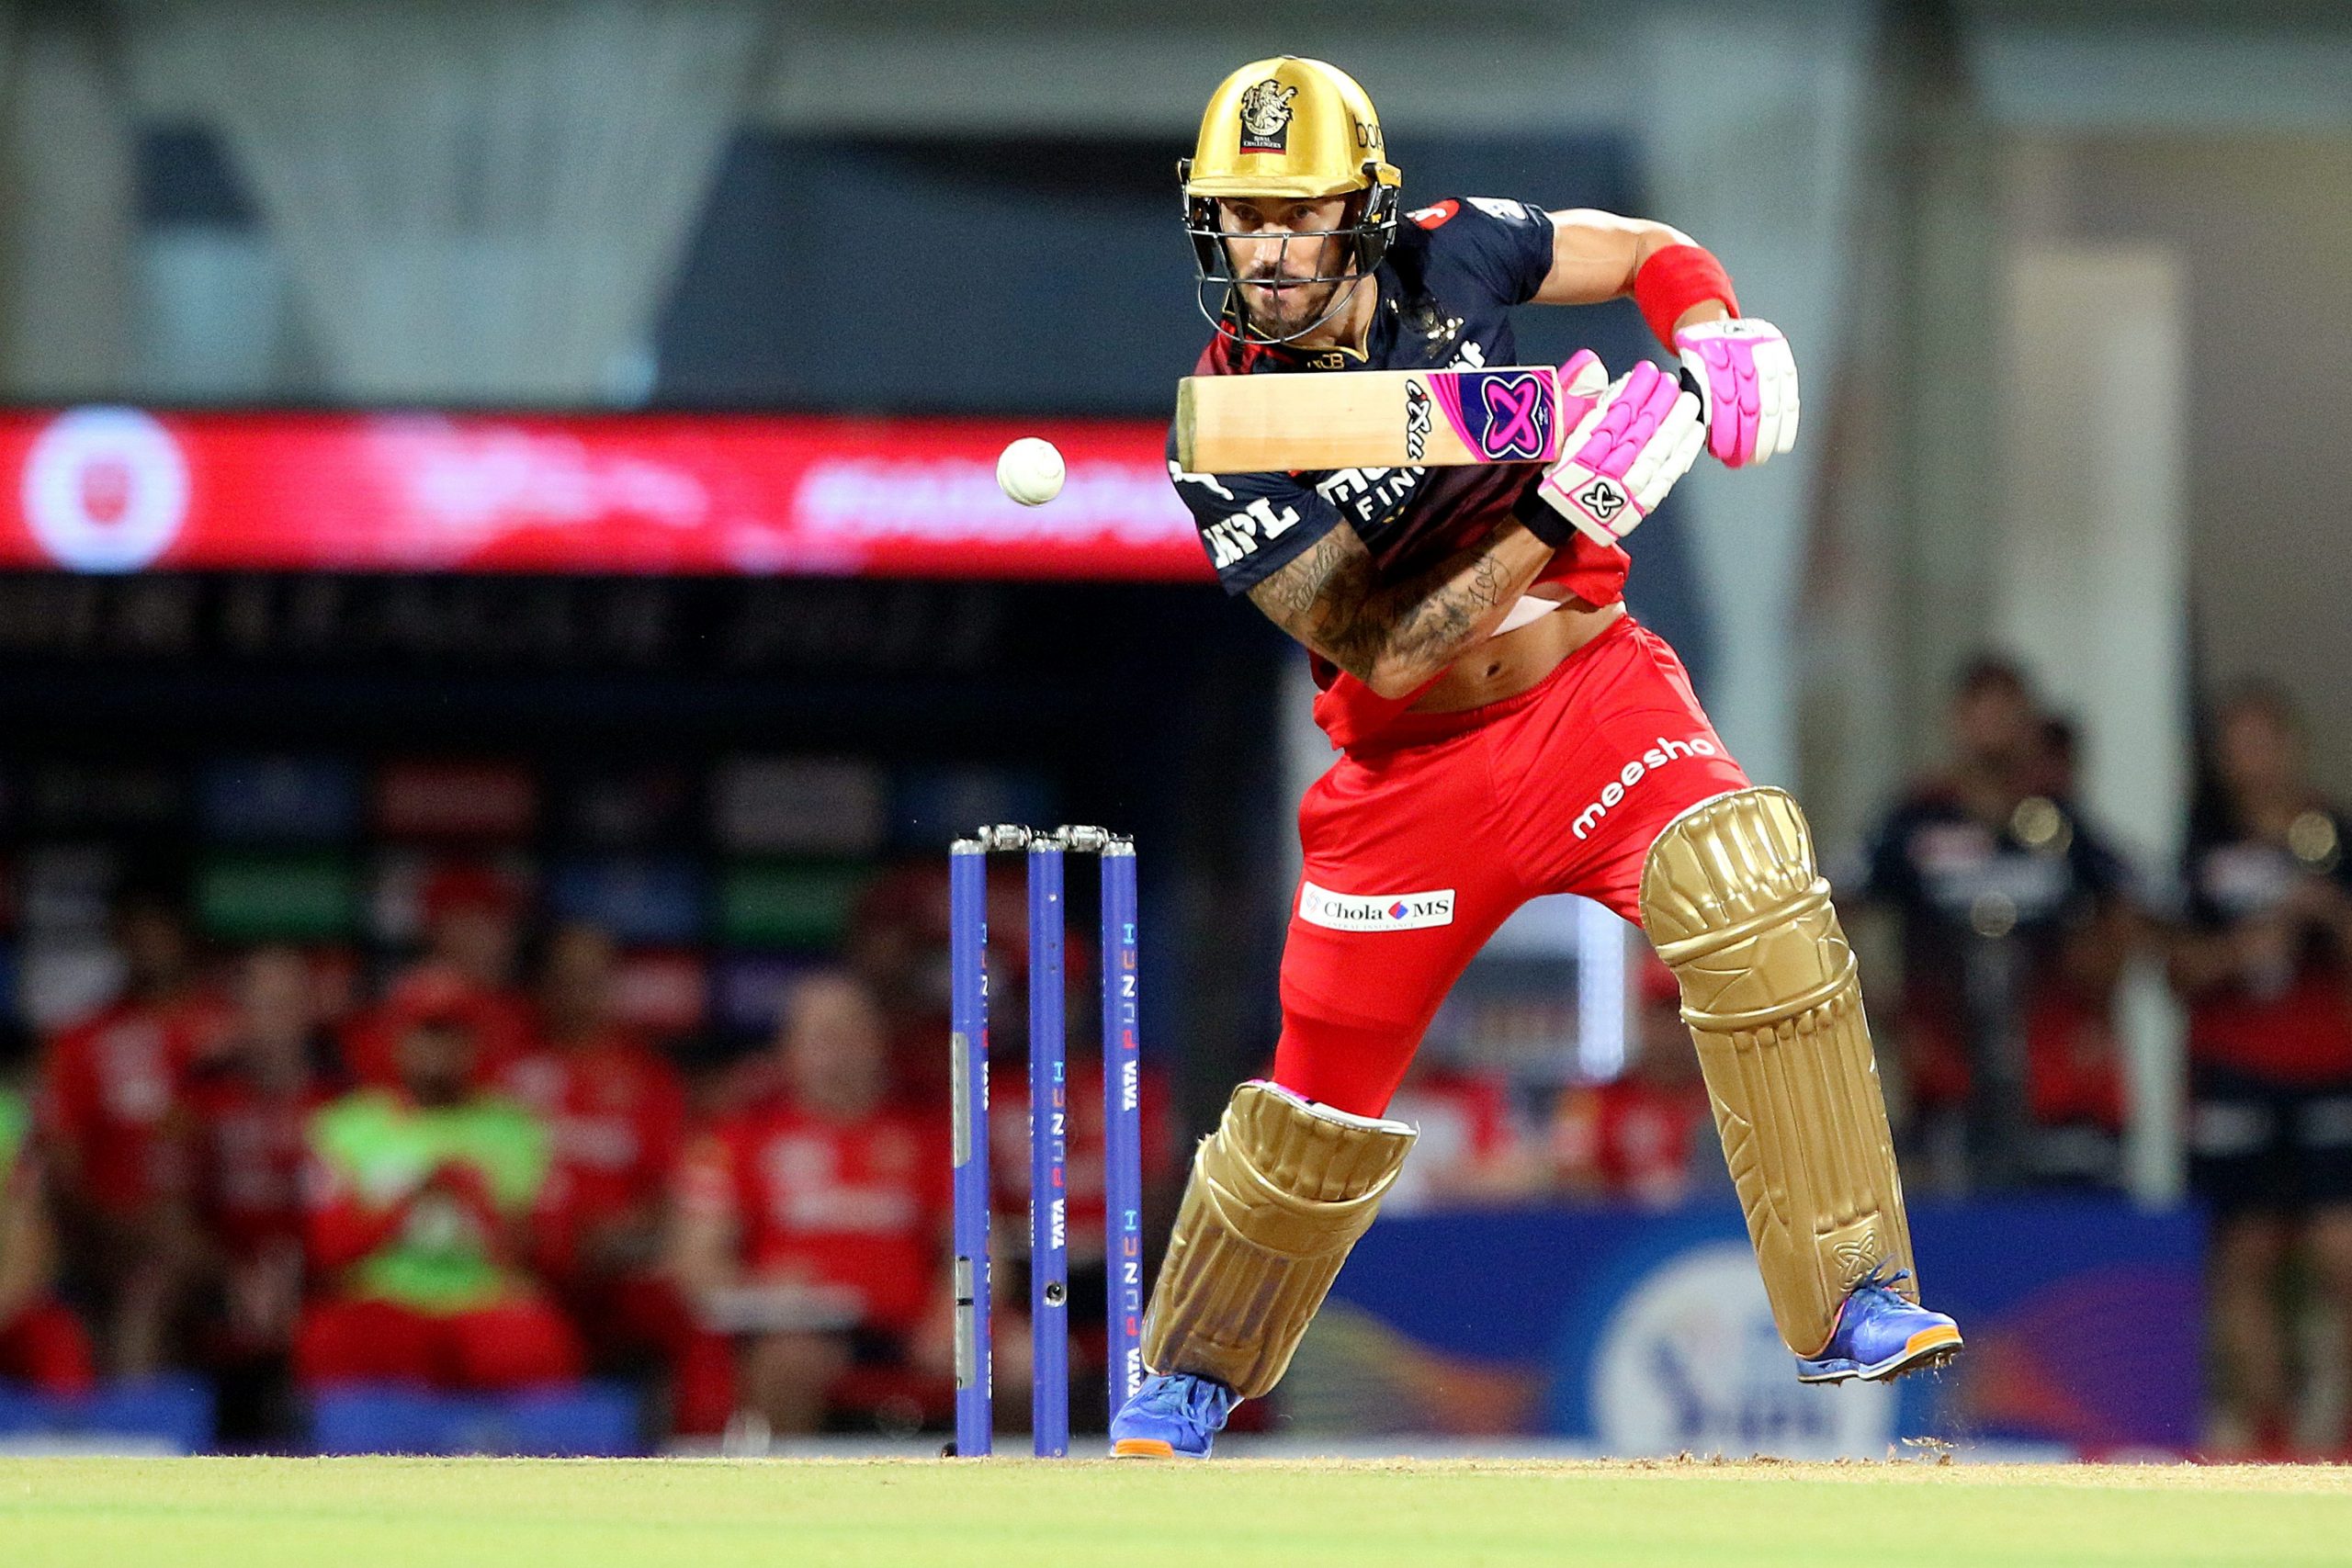 IPL 2022: When and where to watch Rajasthan Royals vs Royal Challengers Bangalore, live stream?